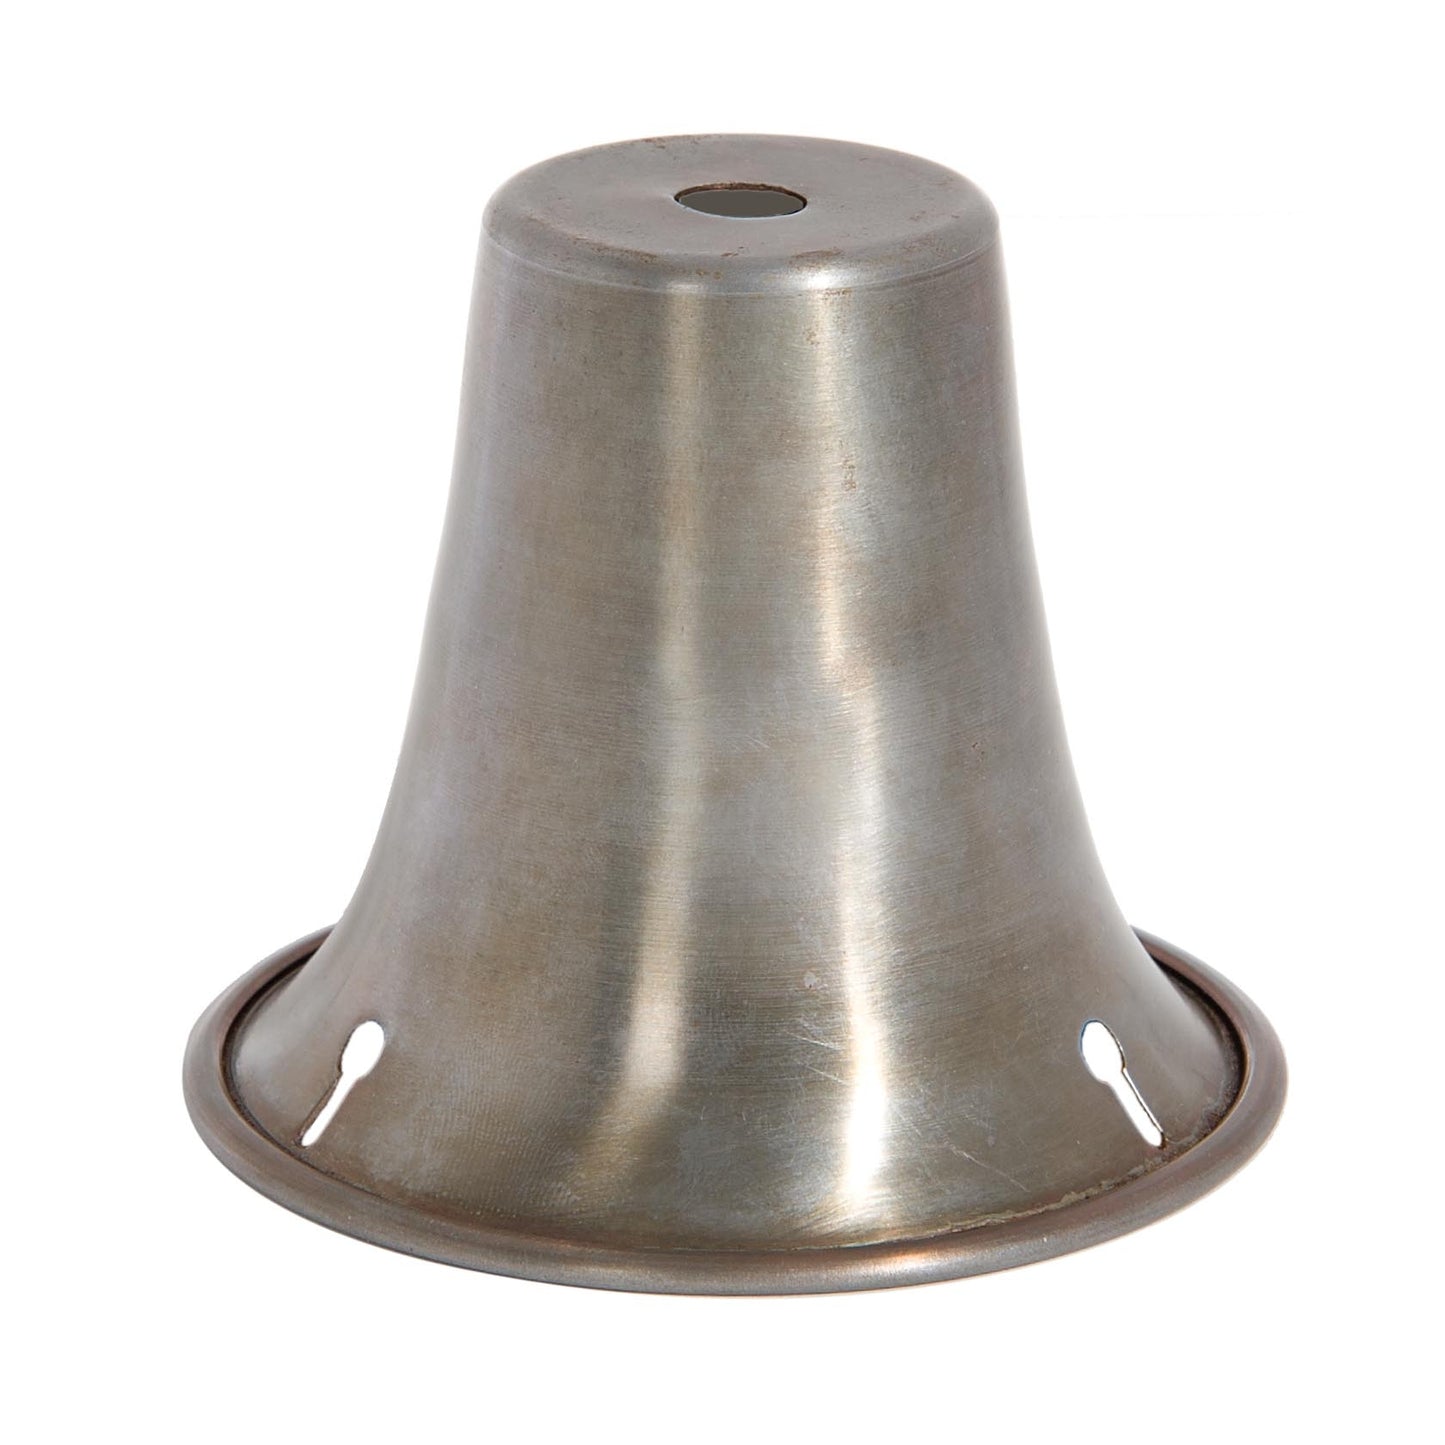 3-1/2 Inch Outer Diameter Unfinished Steel Bead-Chain Shade Holder, 1l8 IP Slip